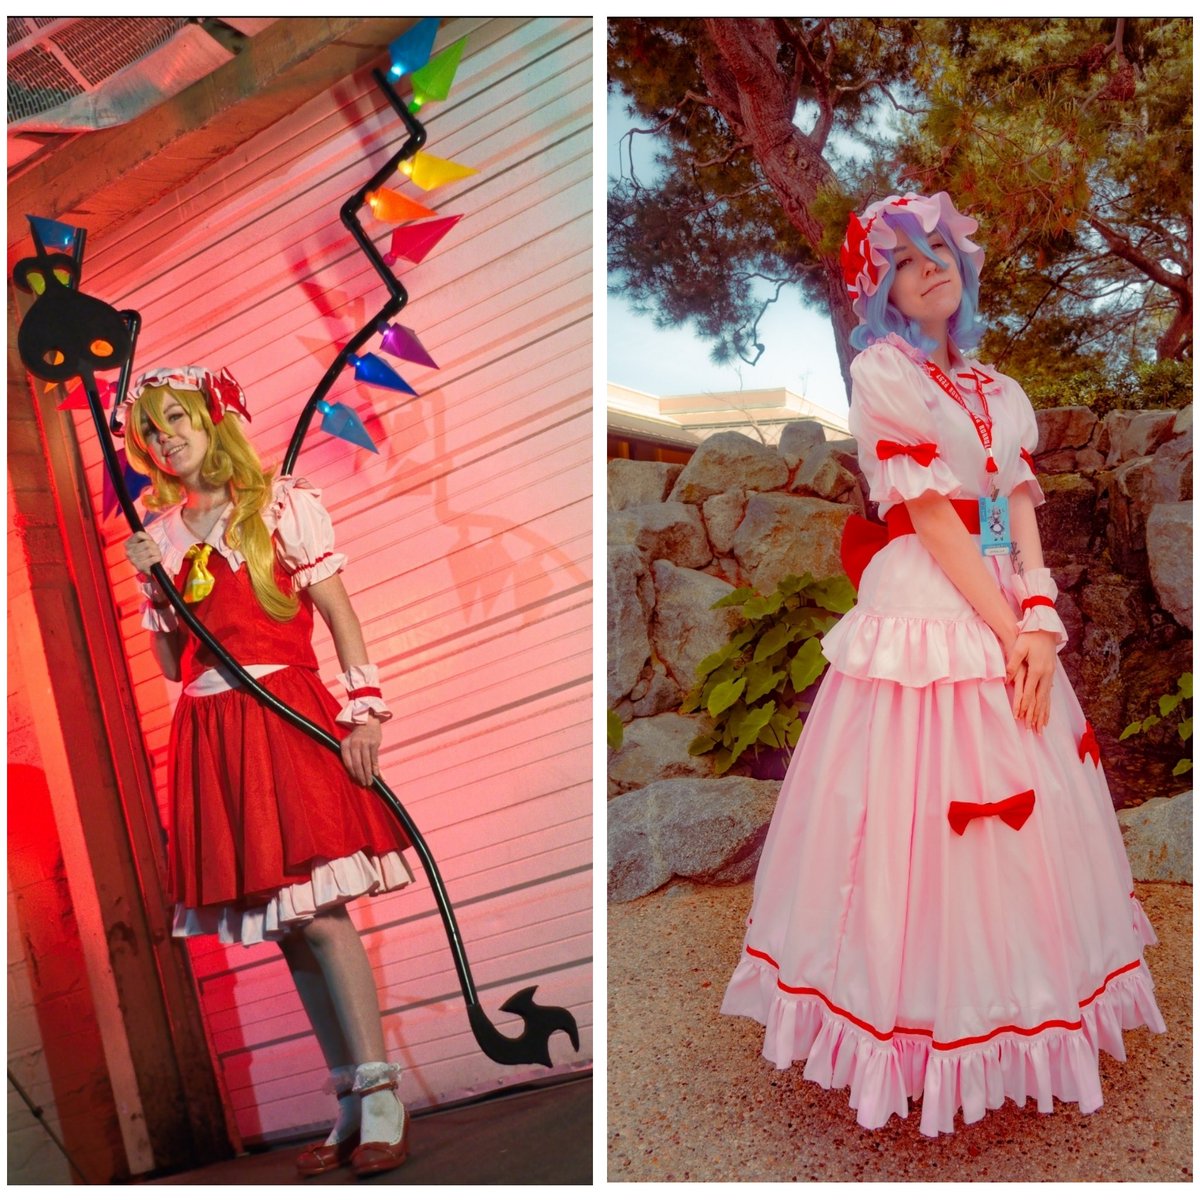 🦇🌹The Scarlet Sisters🌹🦇

#touhou #touhouproject #東方Project #touhoucosplay #eosd #remiliascarlet #flandrescarlet #touhoufest #cosplay